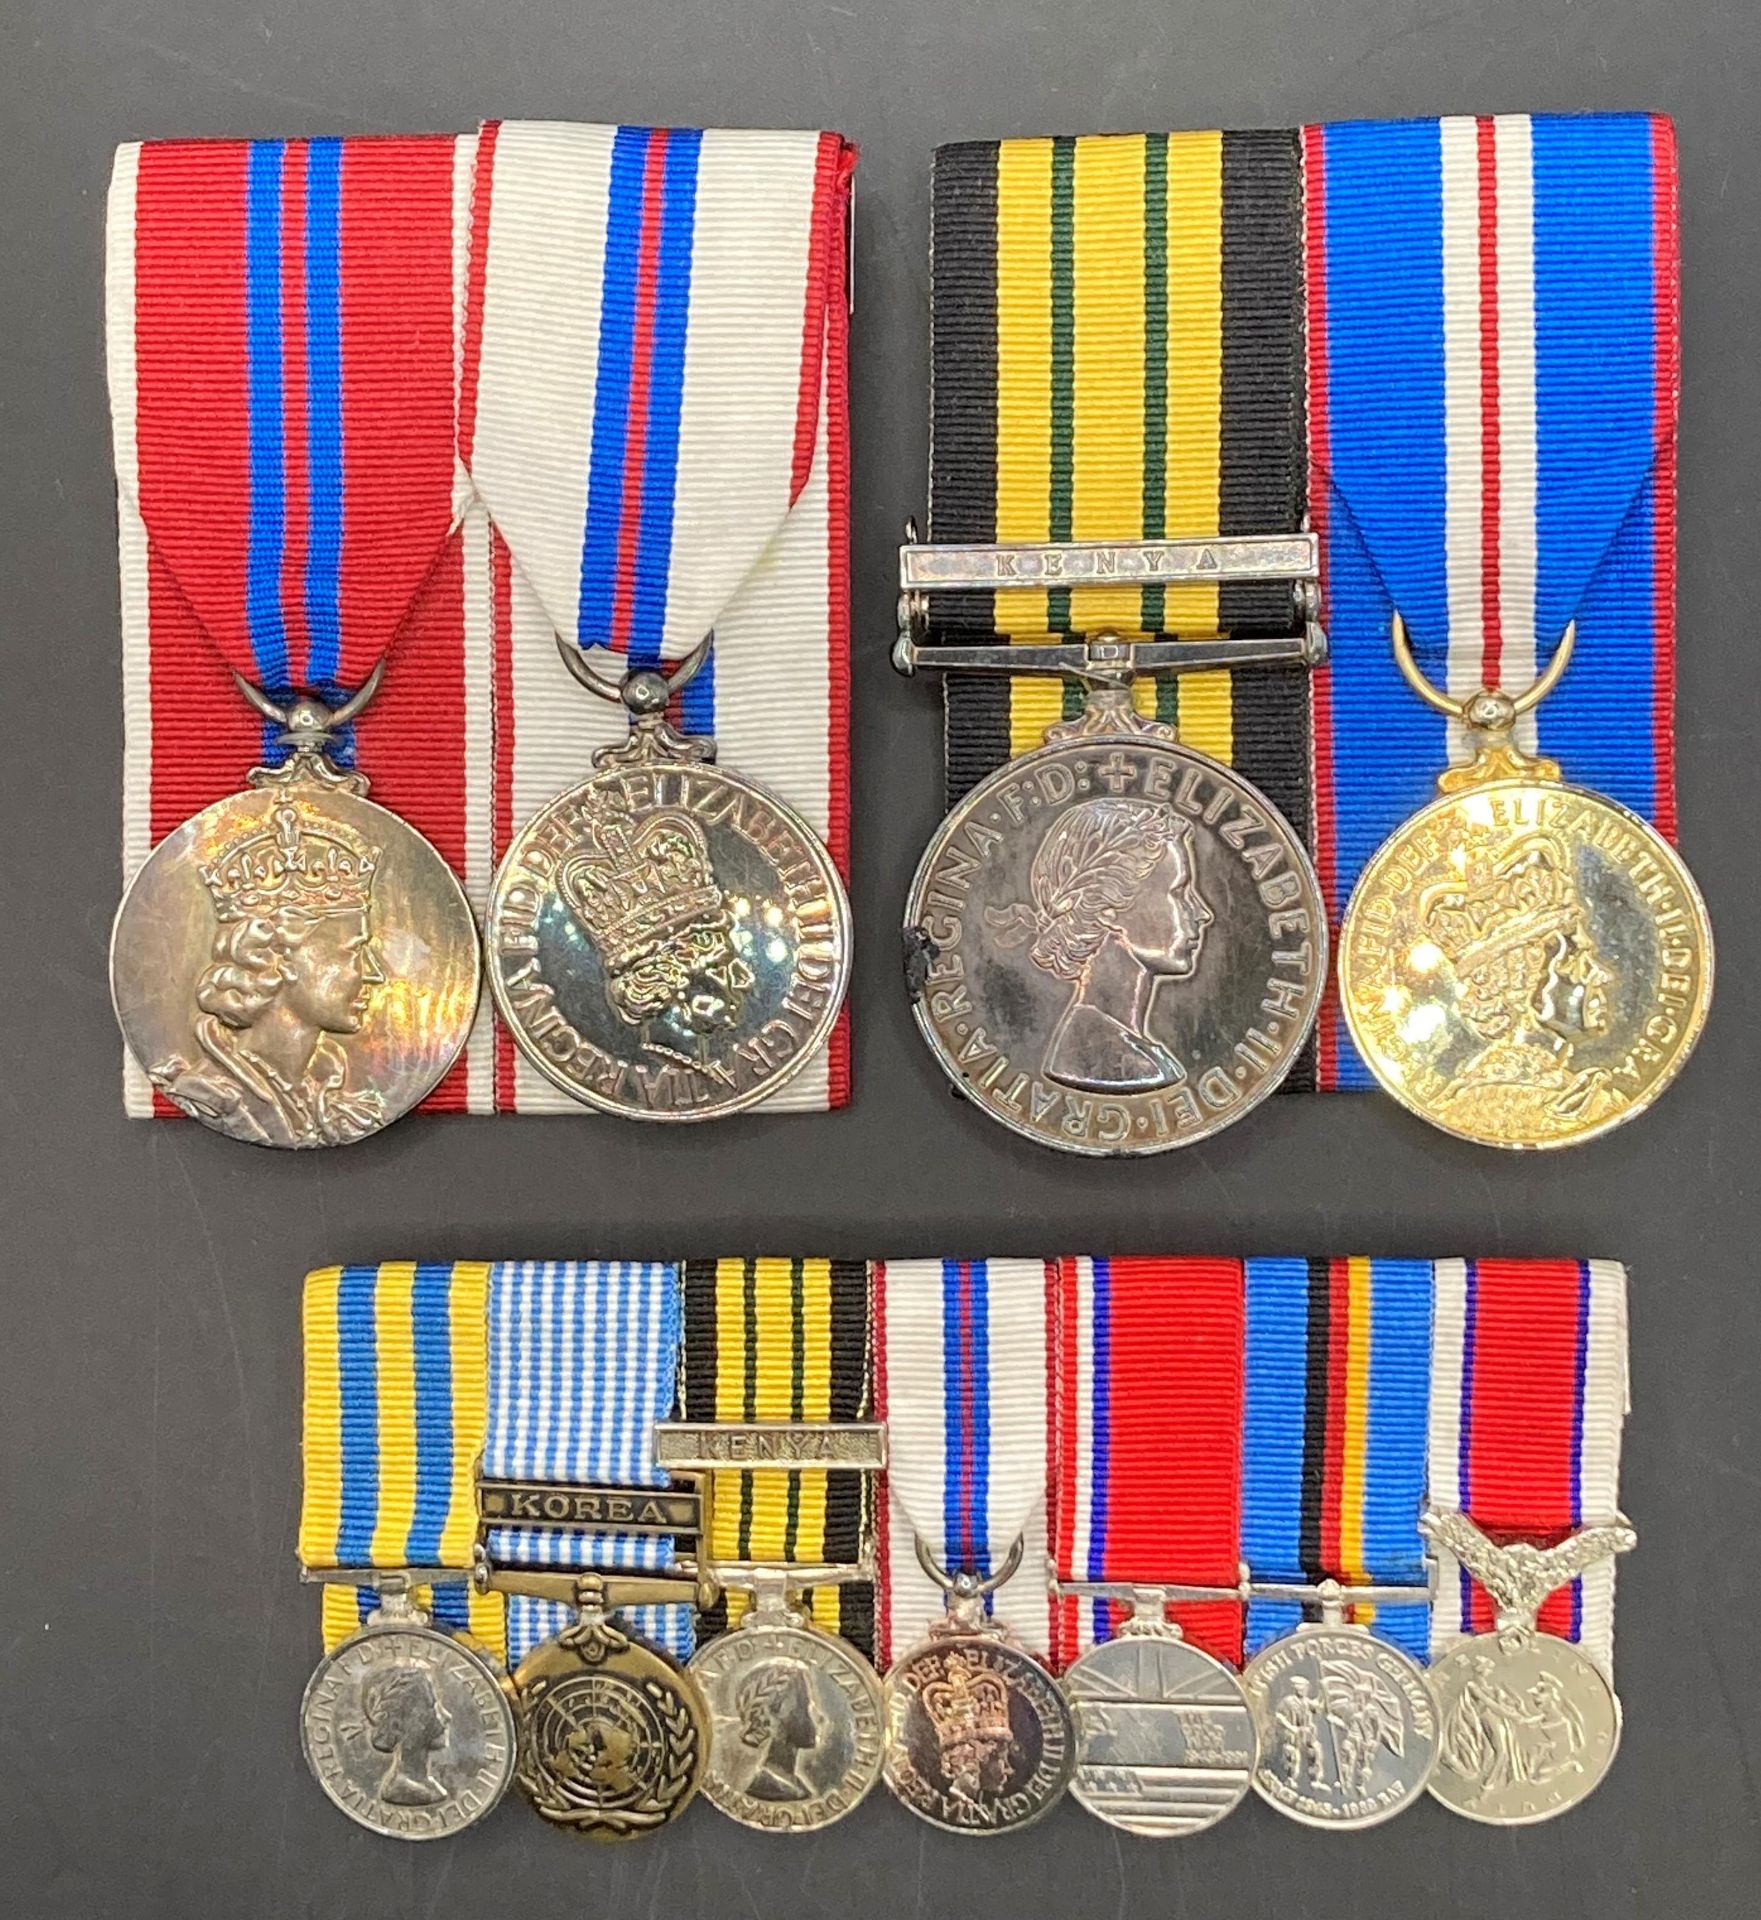 Africa General Service Medal (Queen Elizabeth II) complete with ribbon and clasp for Kenya and a